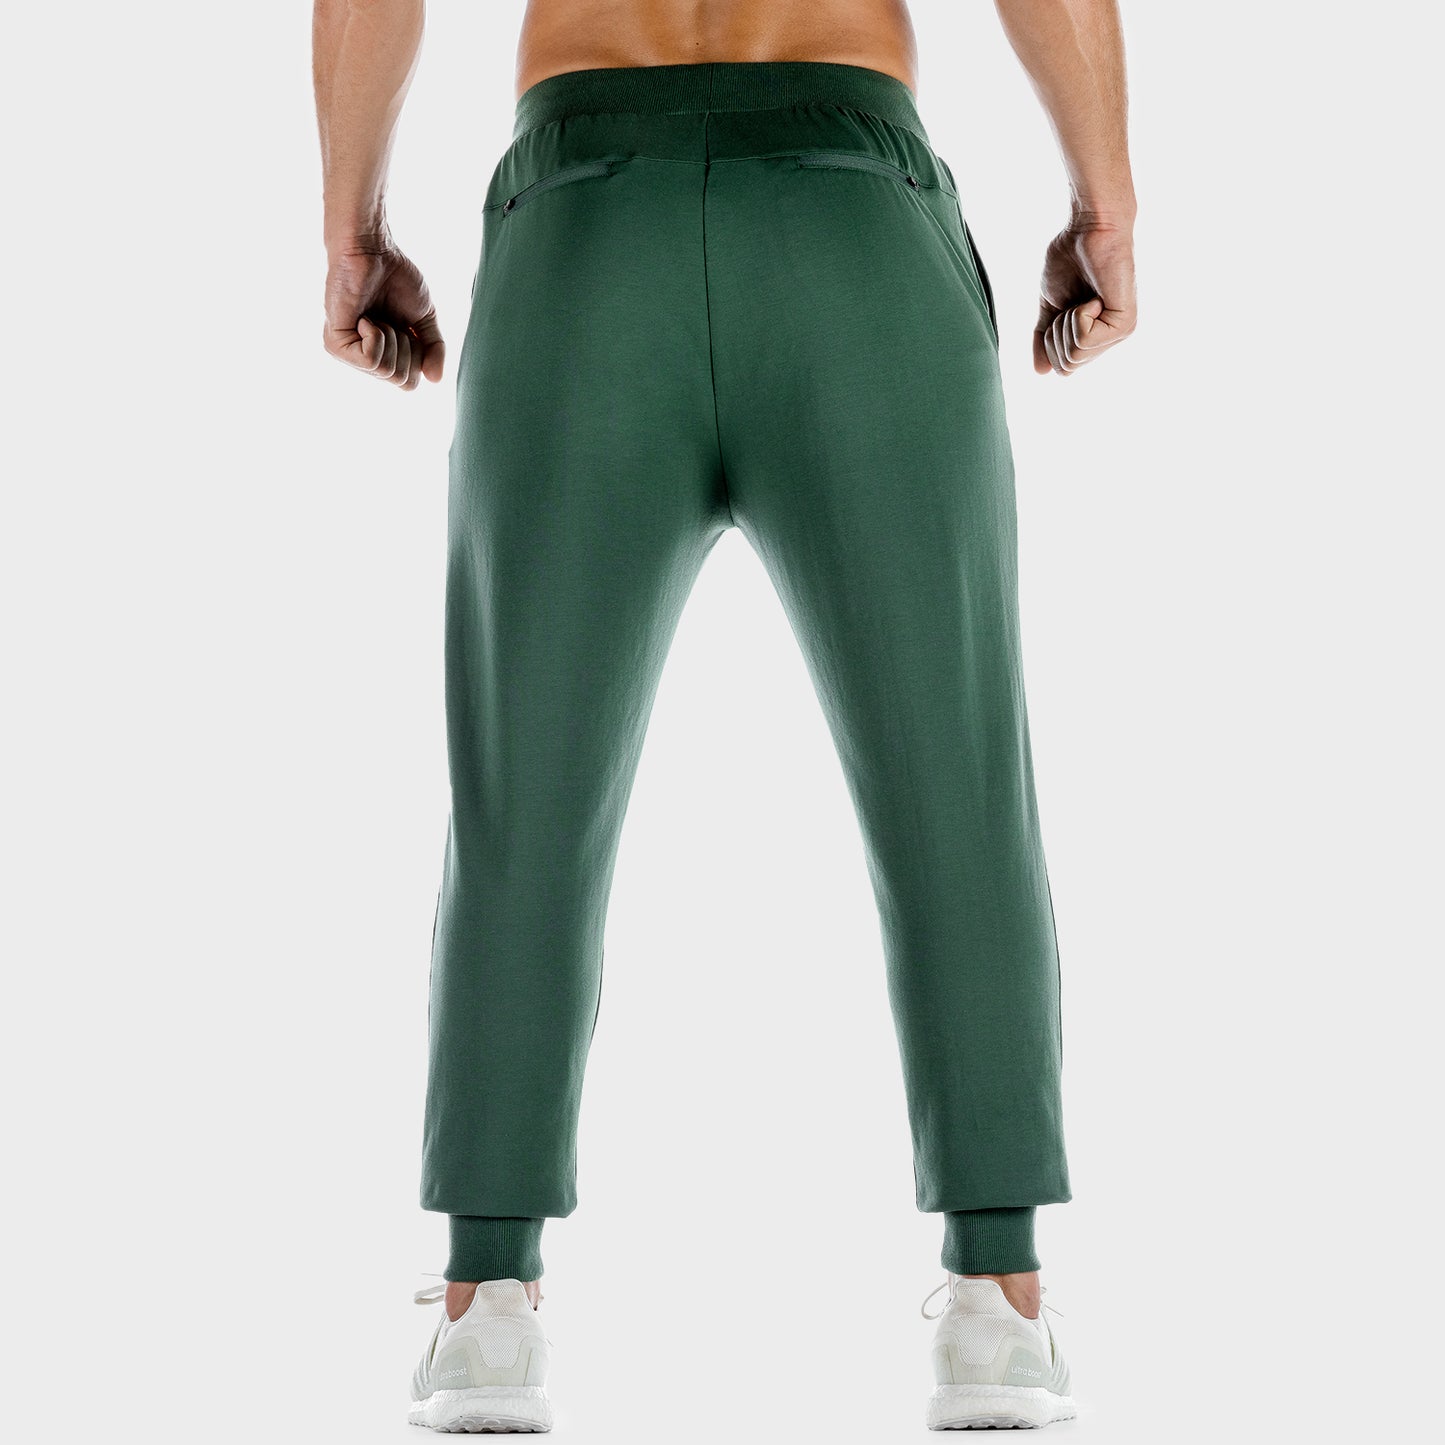 squatwolf-gym-wear-lab-360-joggers-green-workout-joggers-for-men